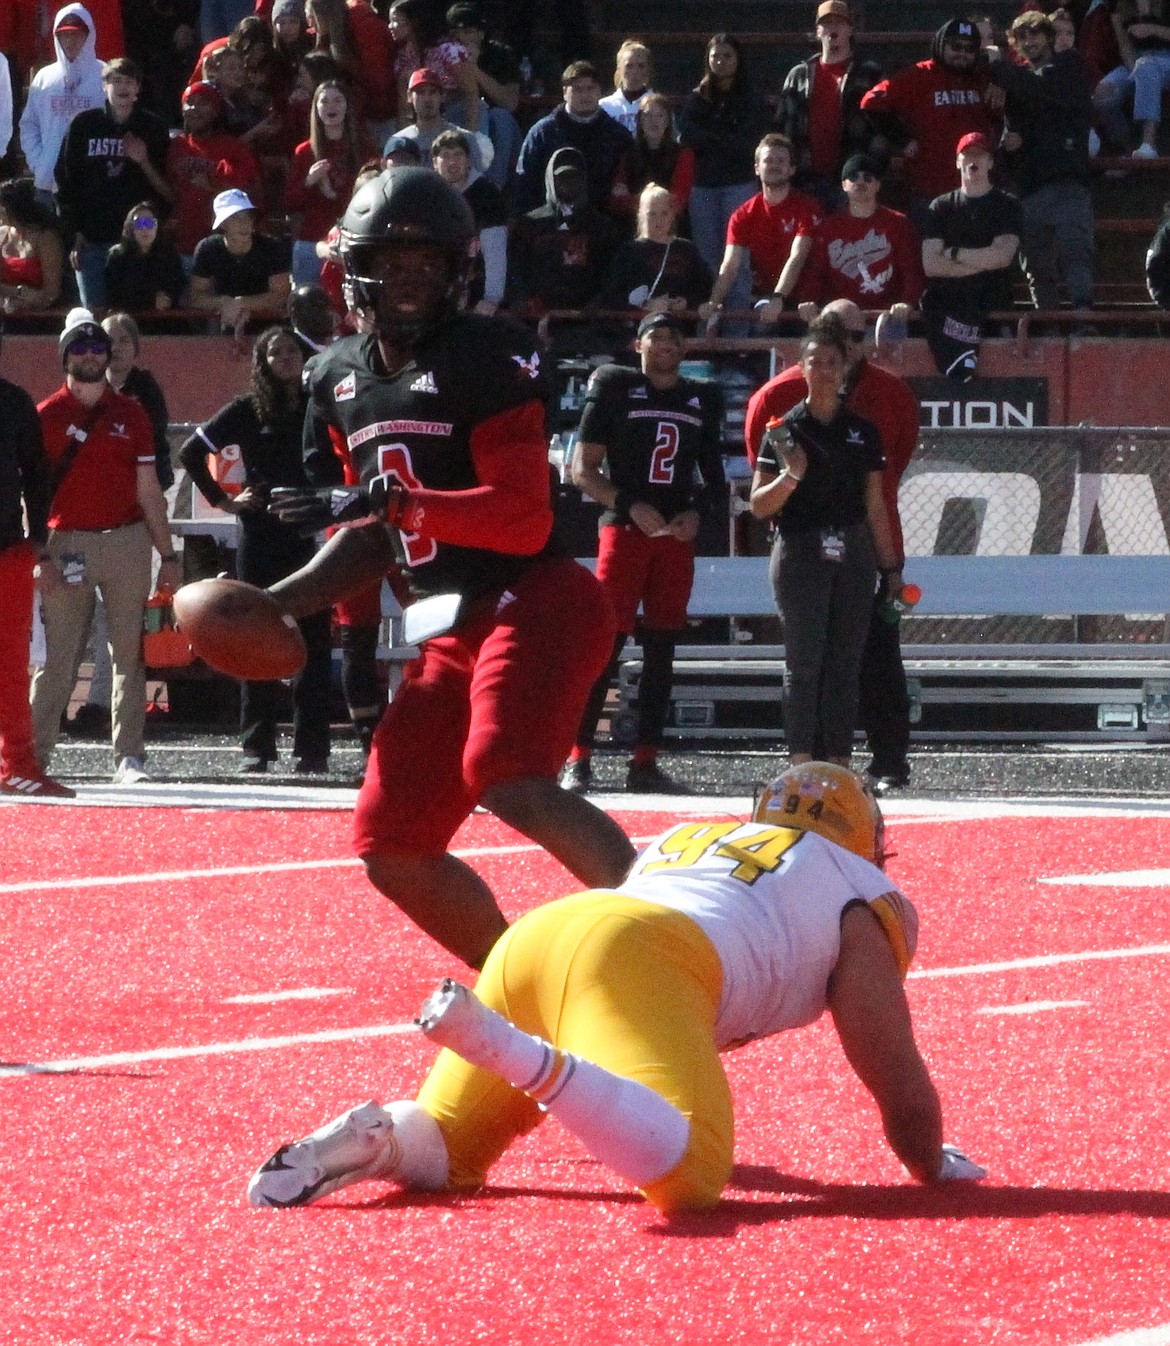 MARK NELKE/Press
Idaho's Nate DeGraw, a junior from Post Falls, has Eastern Washington quarterback Eric Barriere by the ankle in the second half on Saturday. Barriere was still able to get off his pass, though it fell incomplete.